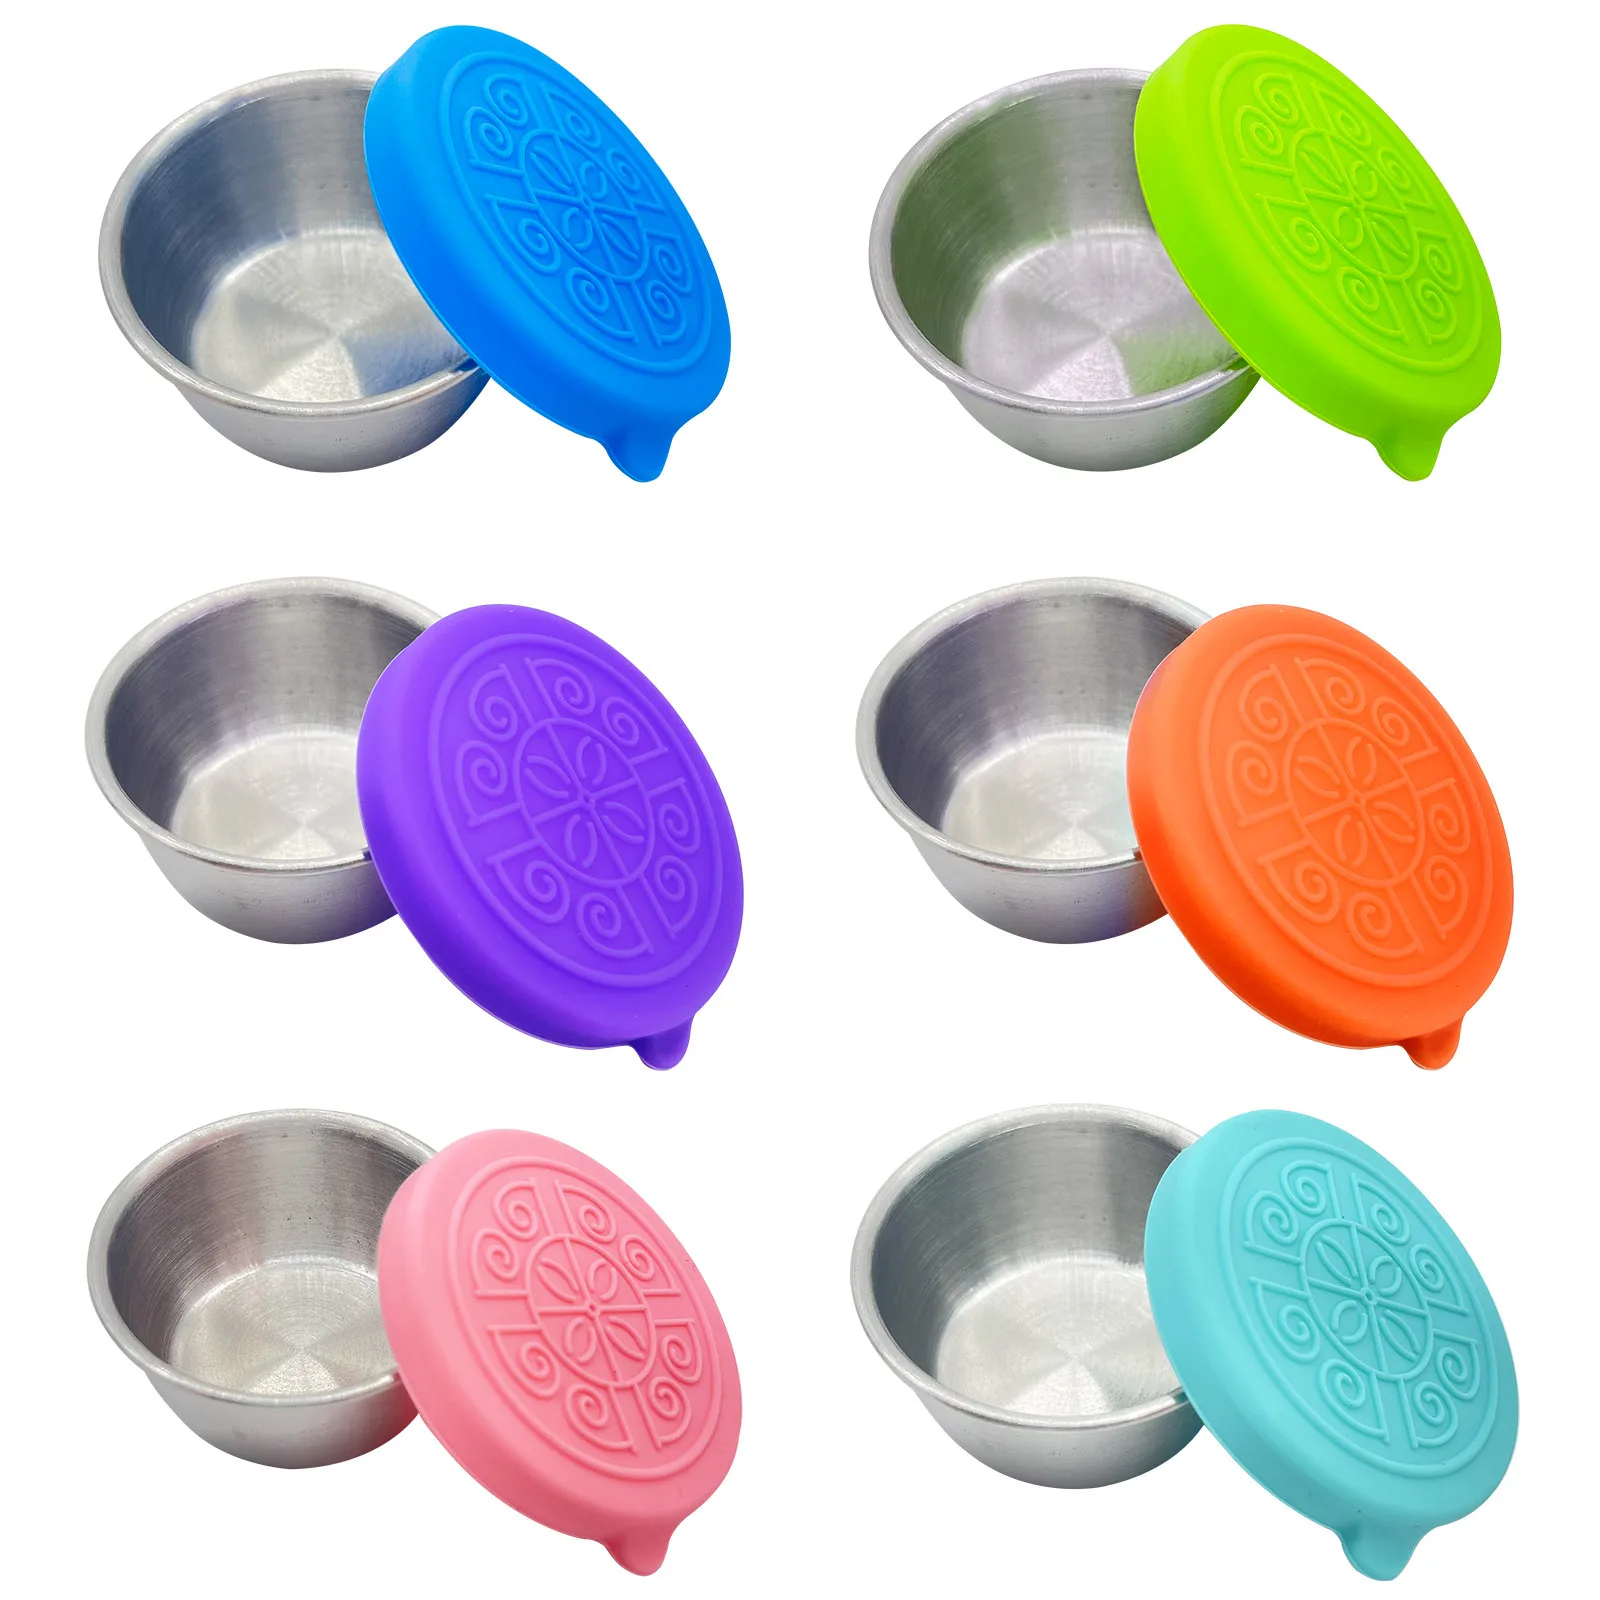 

6pcs Sealed Silicone Lid Sauce Cup Stainless Steel Small Seasoning Bowl Salad Dipping Leak-Proof Saucer Box Kitchen Tableware